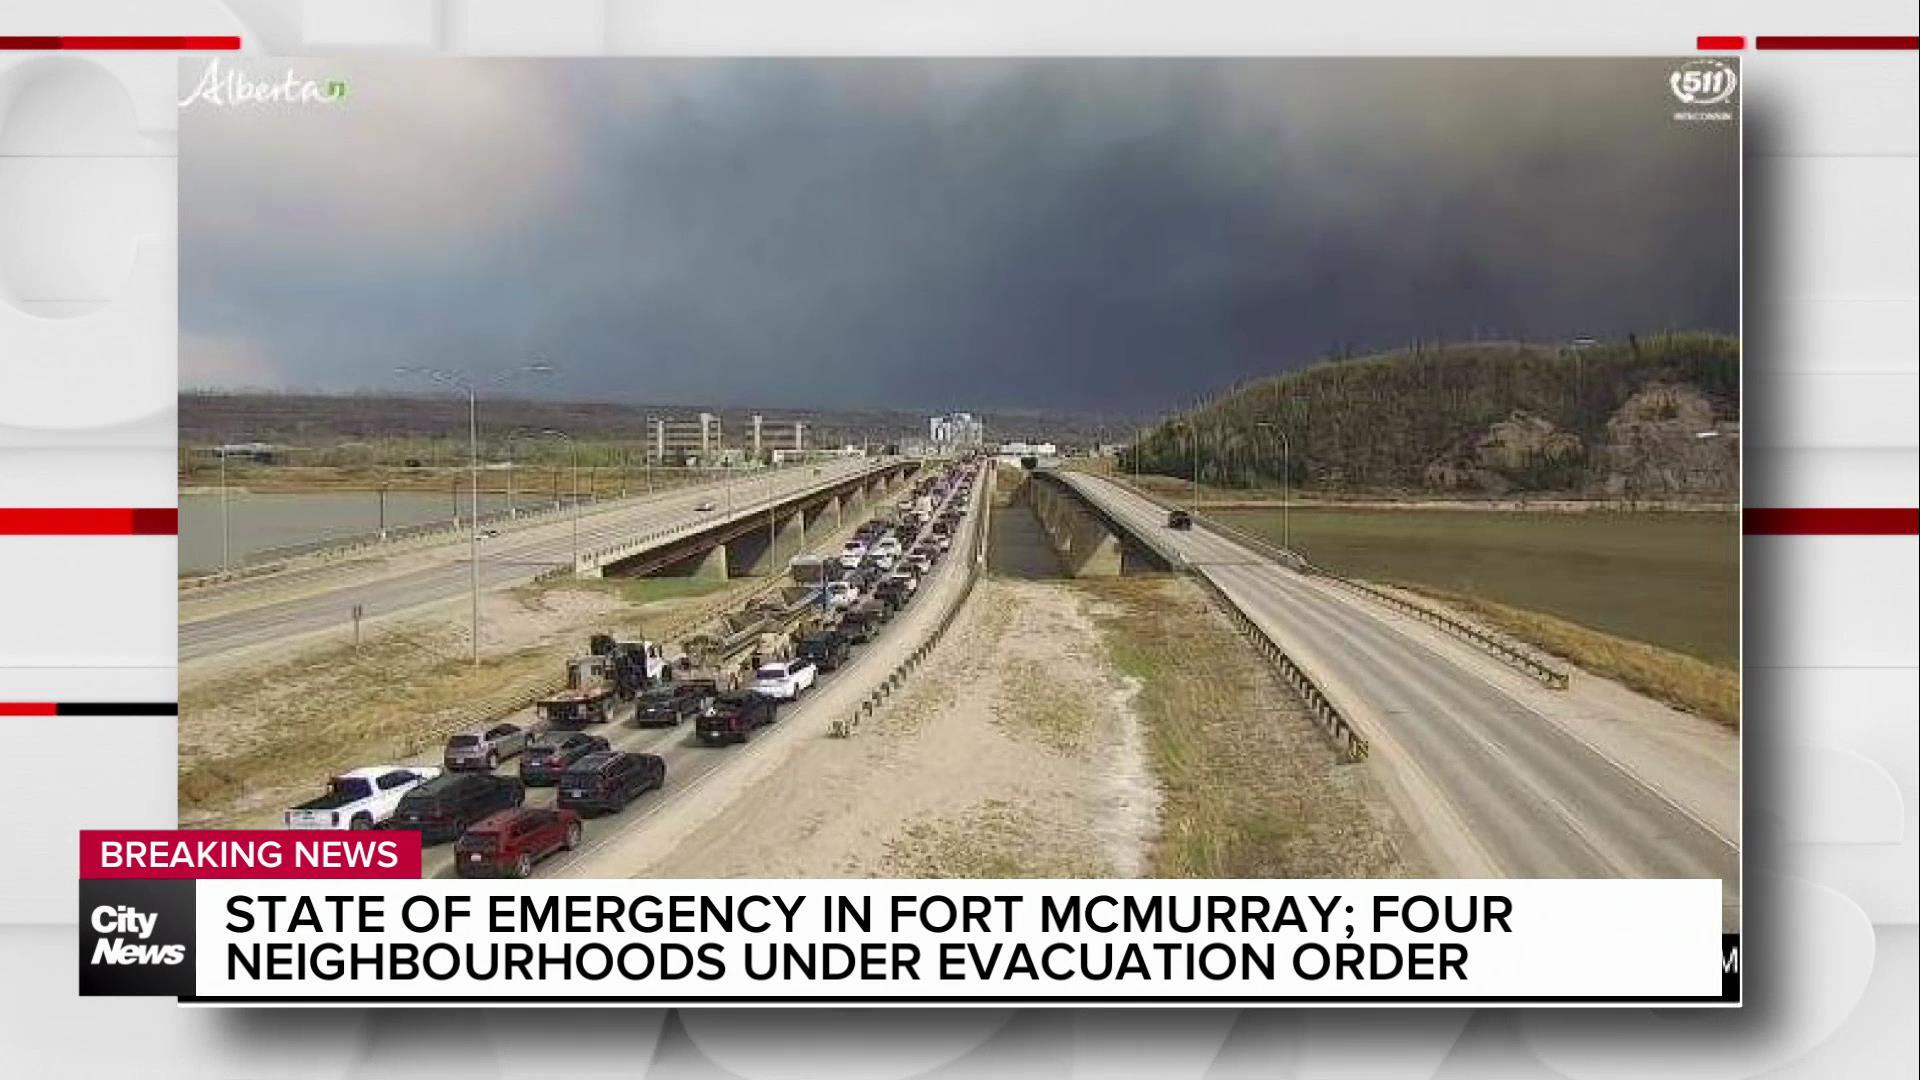 Evacuation Order issued for Fort McMurray